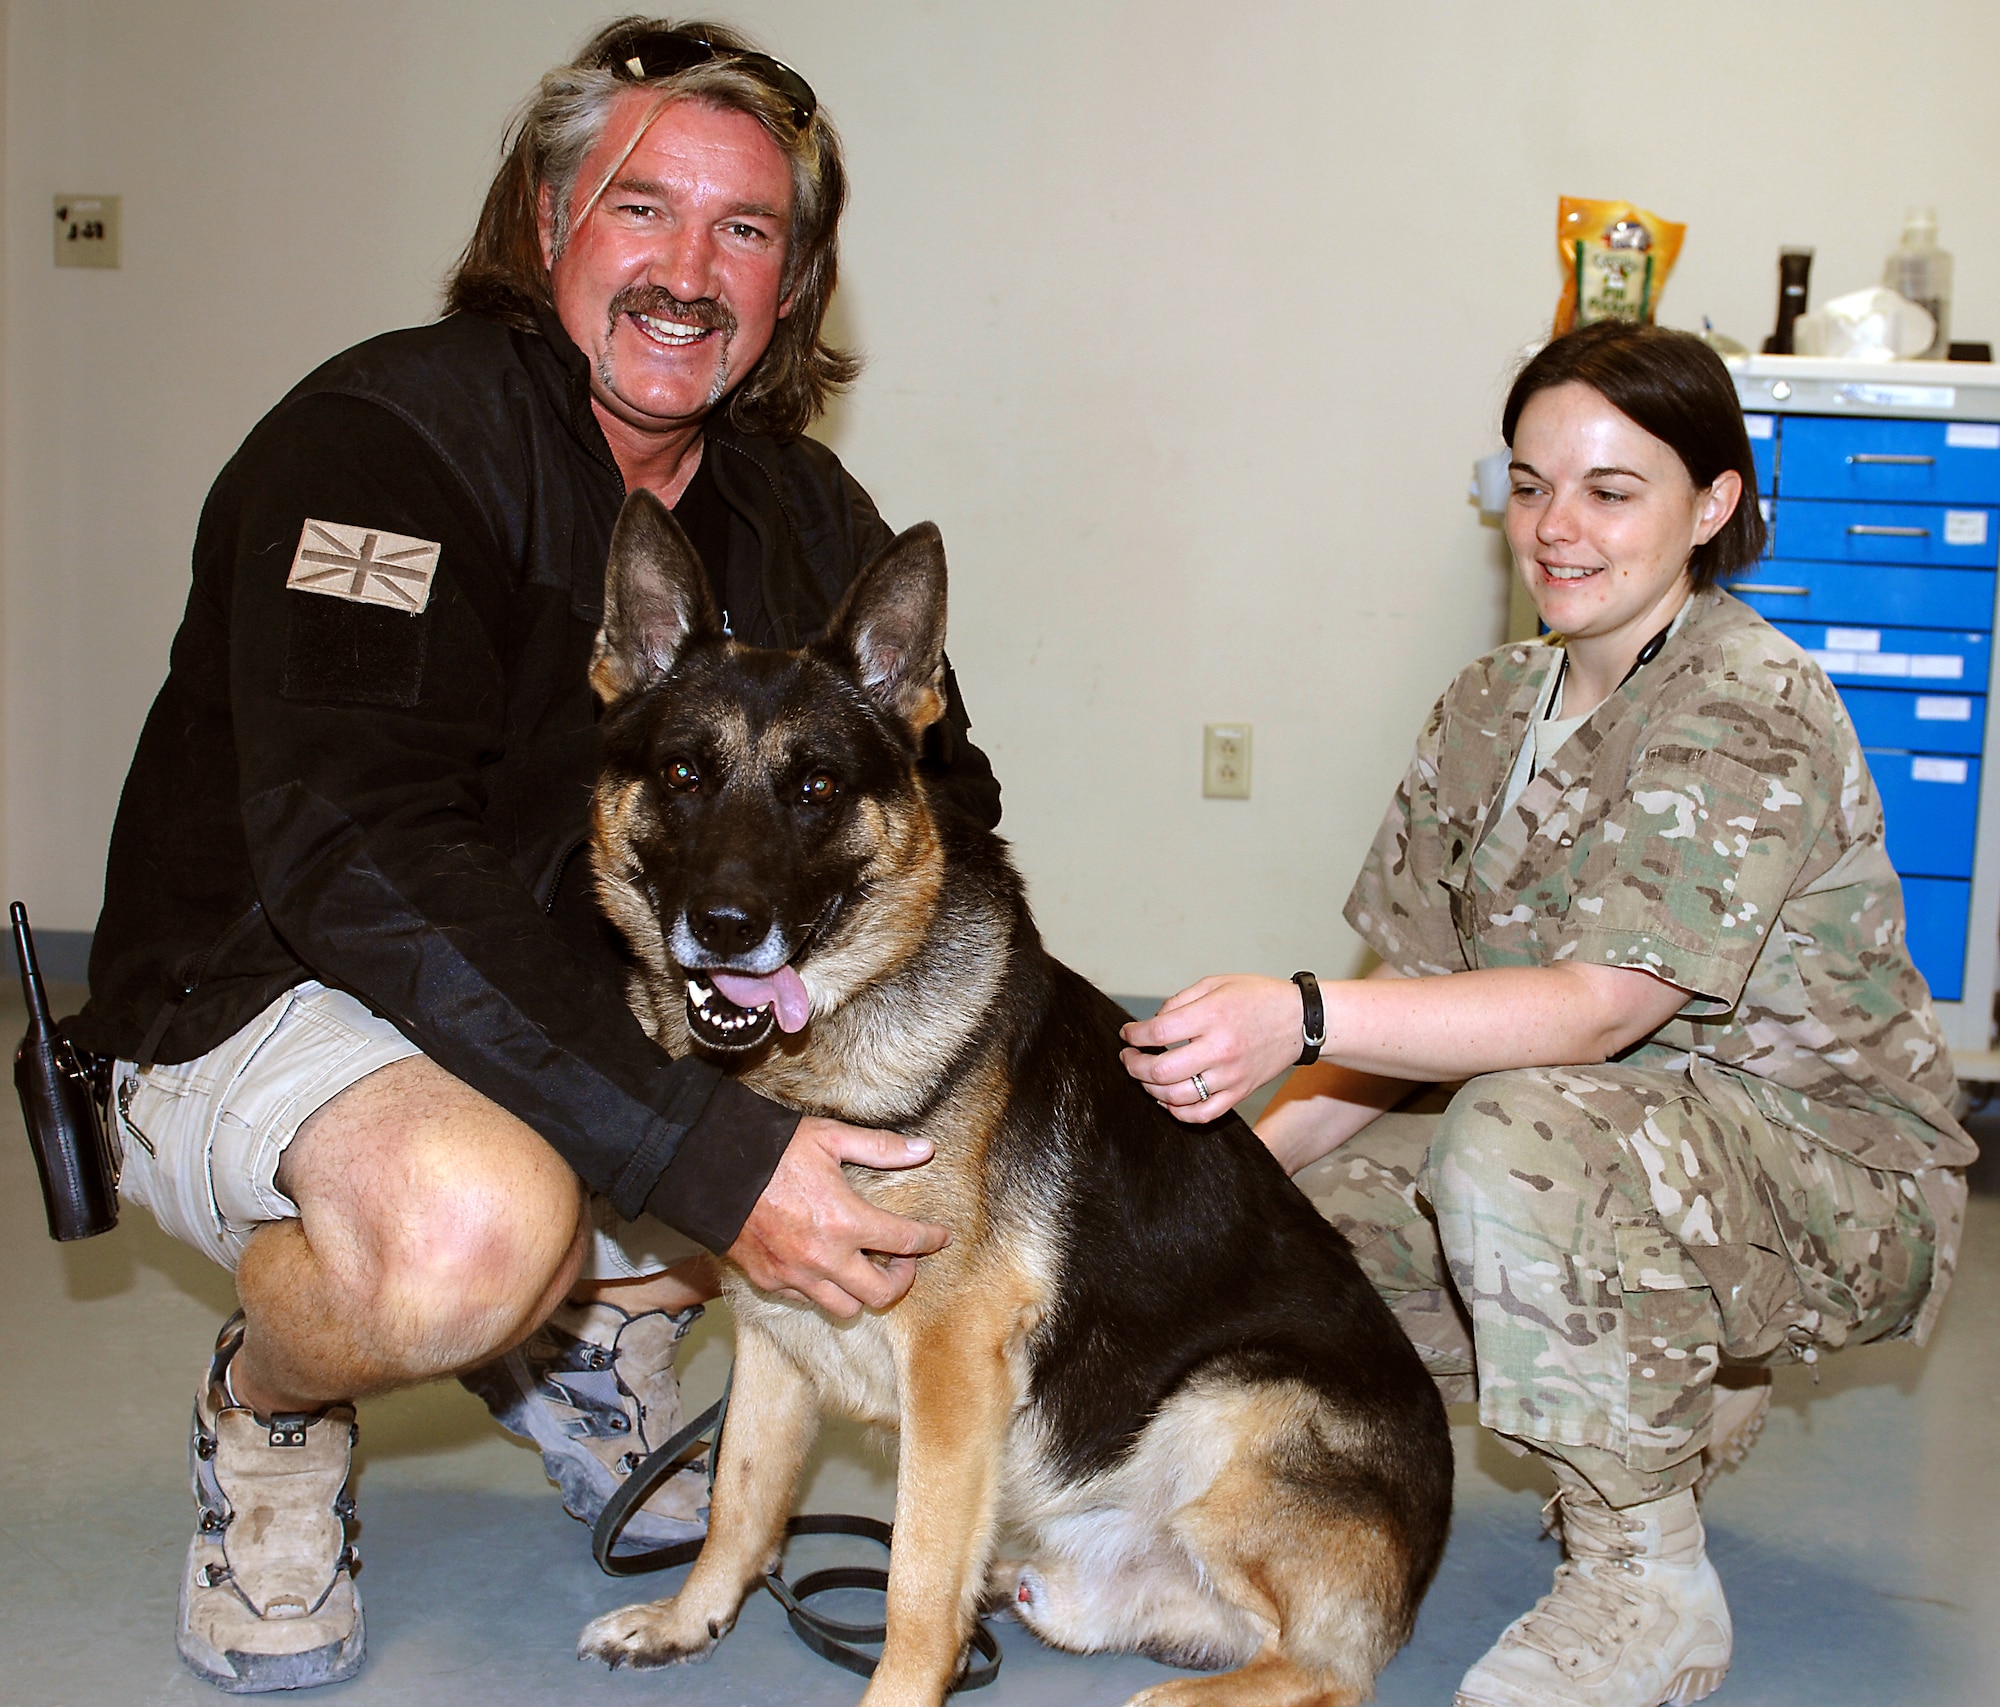 Contract Working Dog Tommi and his handler, Simon Williams (left), Vigilant Canine Services International pose for a photo with U.S. Army Spc. Nicole Lamanna (right), Kandahar Veterinary Treatment Facility animal care specialist, before a routine procedure Nov. 20, 2013, at Kandahar Airfield, Afghanistan. Tommi’s visit was for a routine dental cleaning. (U.S. Air Force photo by Senior Airman Jack Sanders)